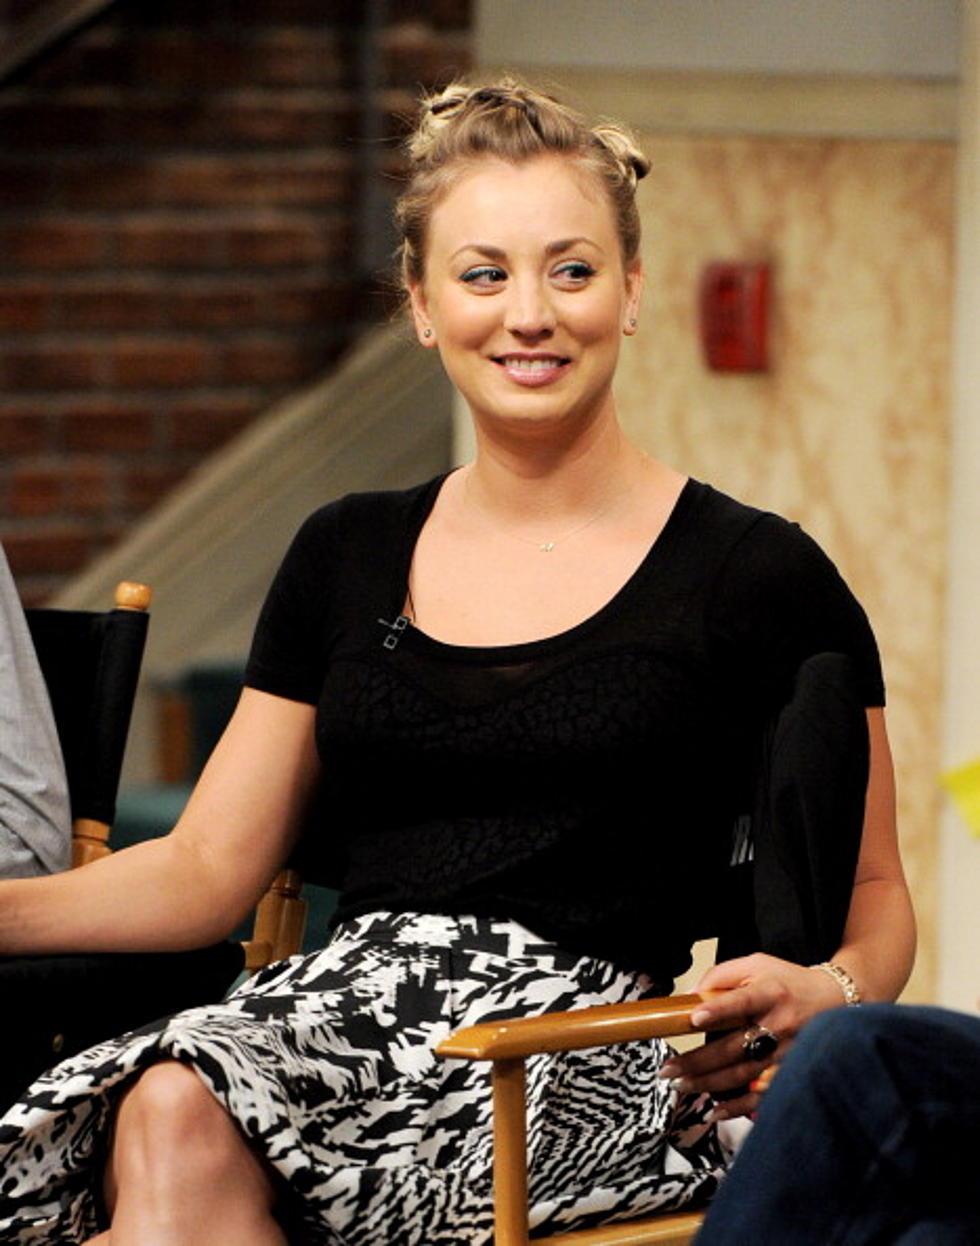 Kaley Cuoco’s Sister Briana Cuoco Auditions on The Voice [VIDEO]